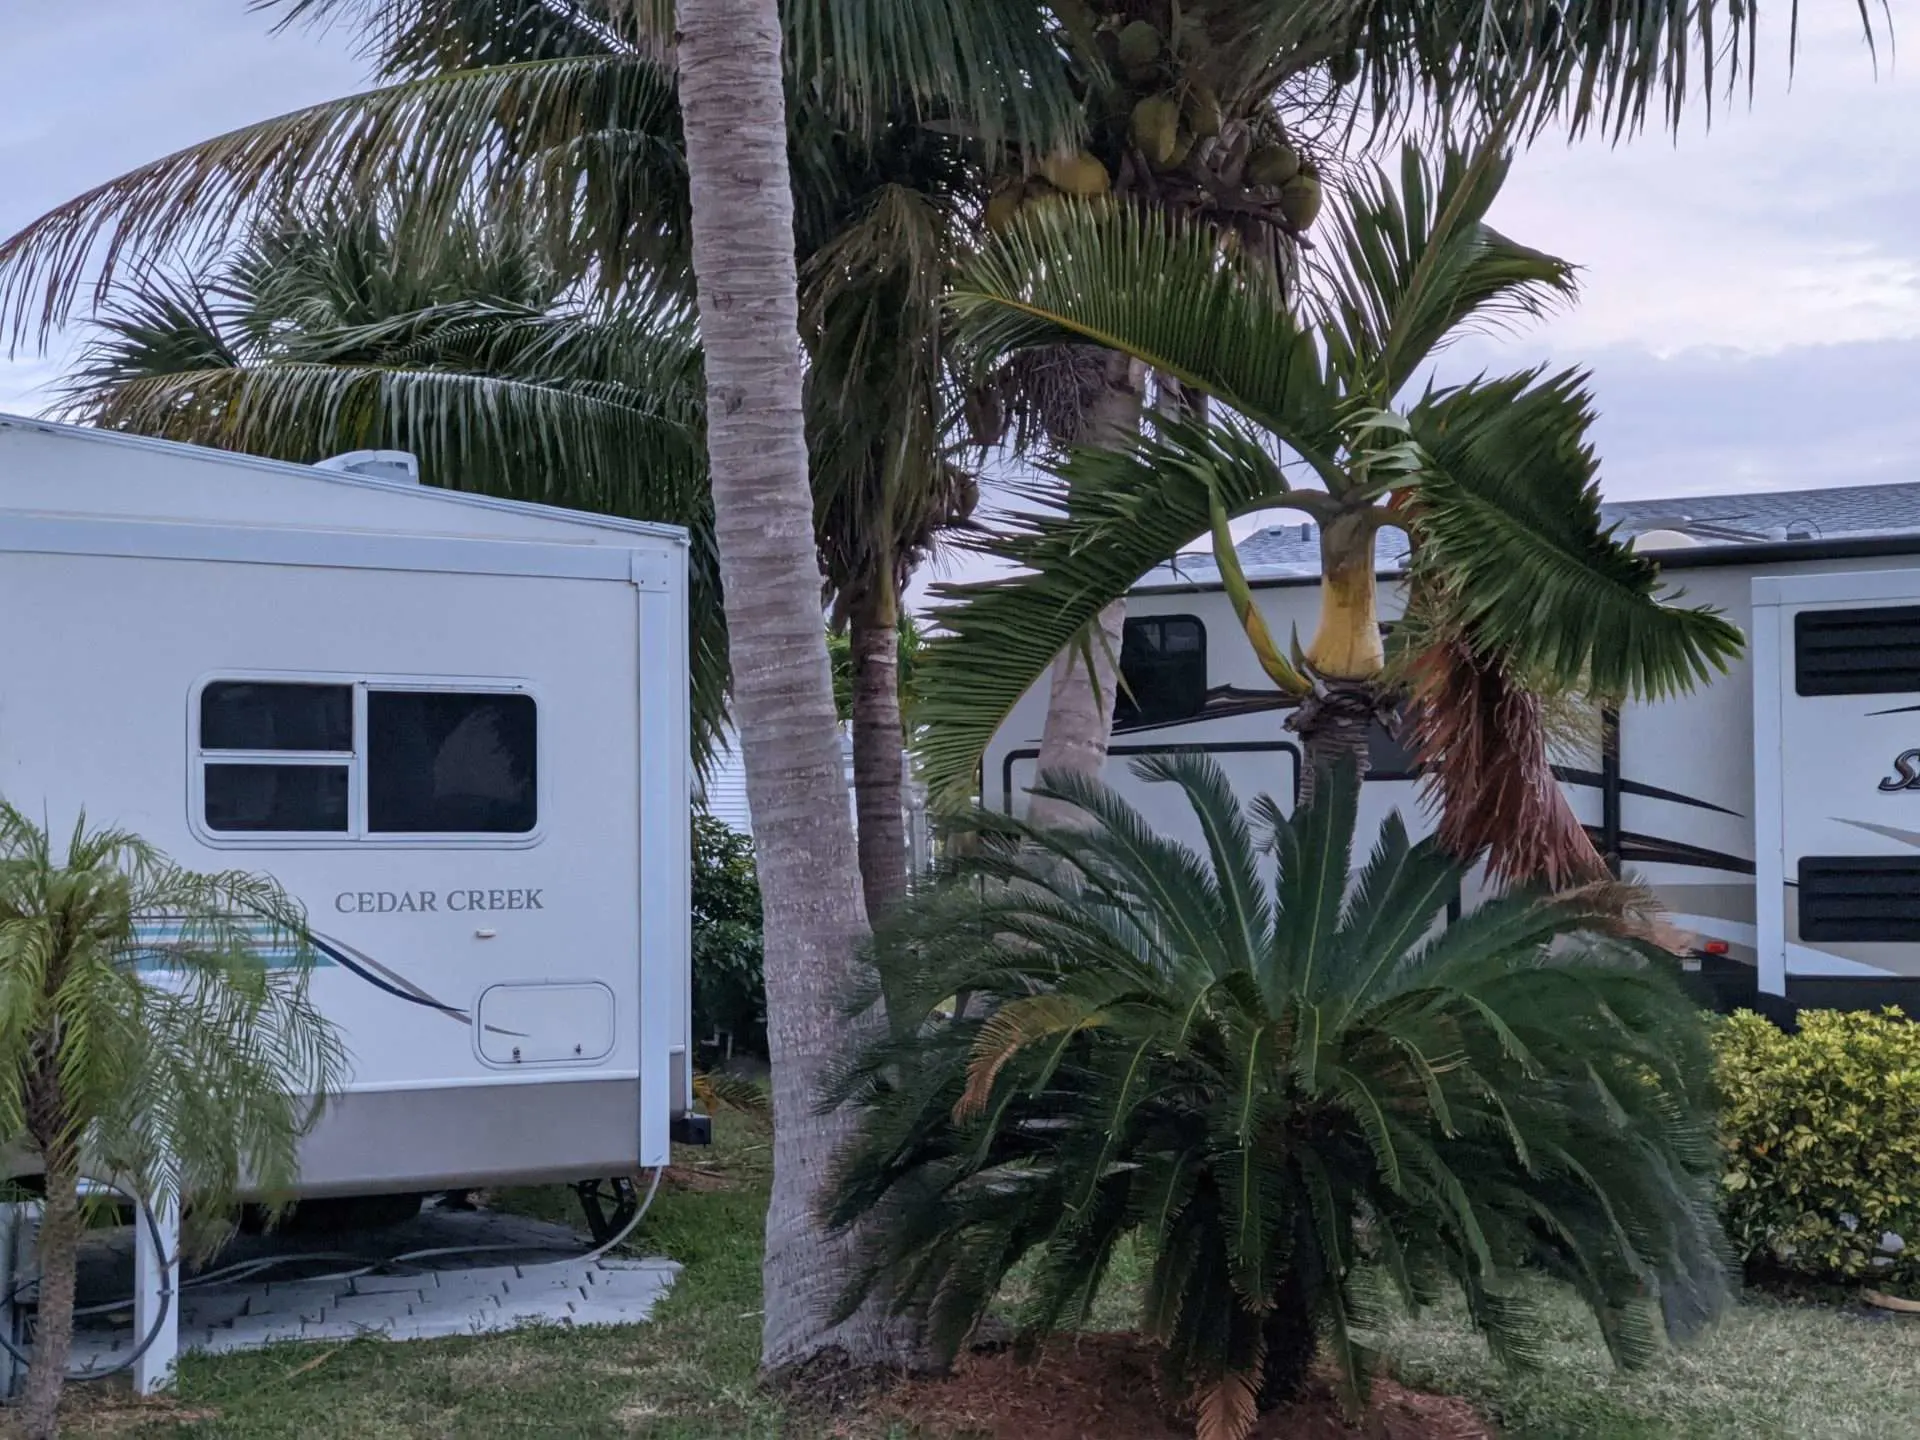 RVs parked at campsite in Florida.